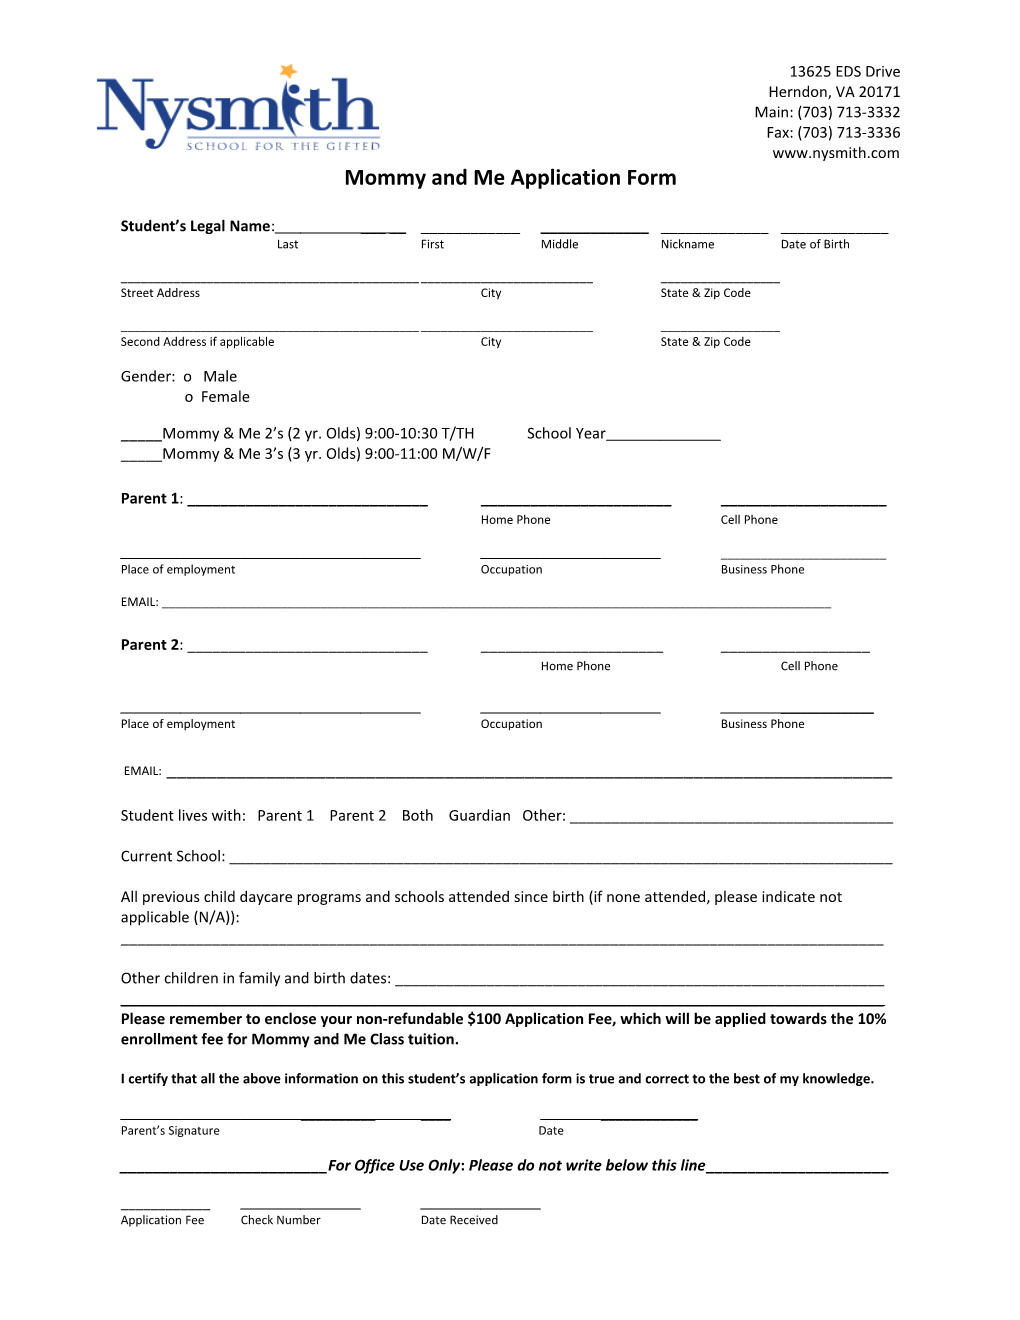 Mommy and Me Application Form